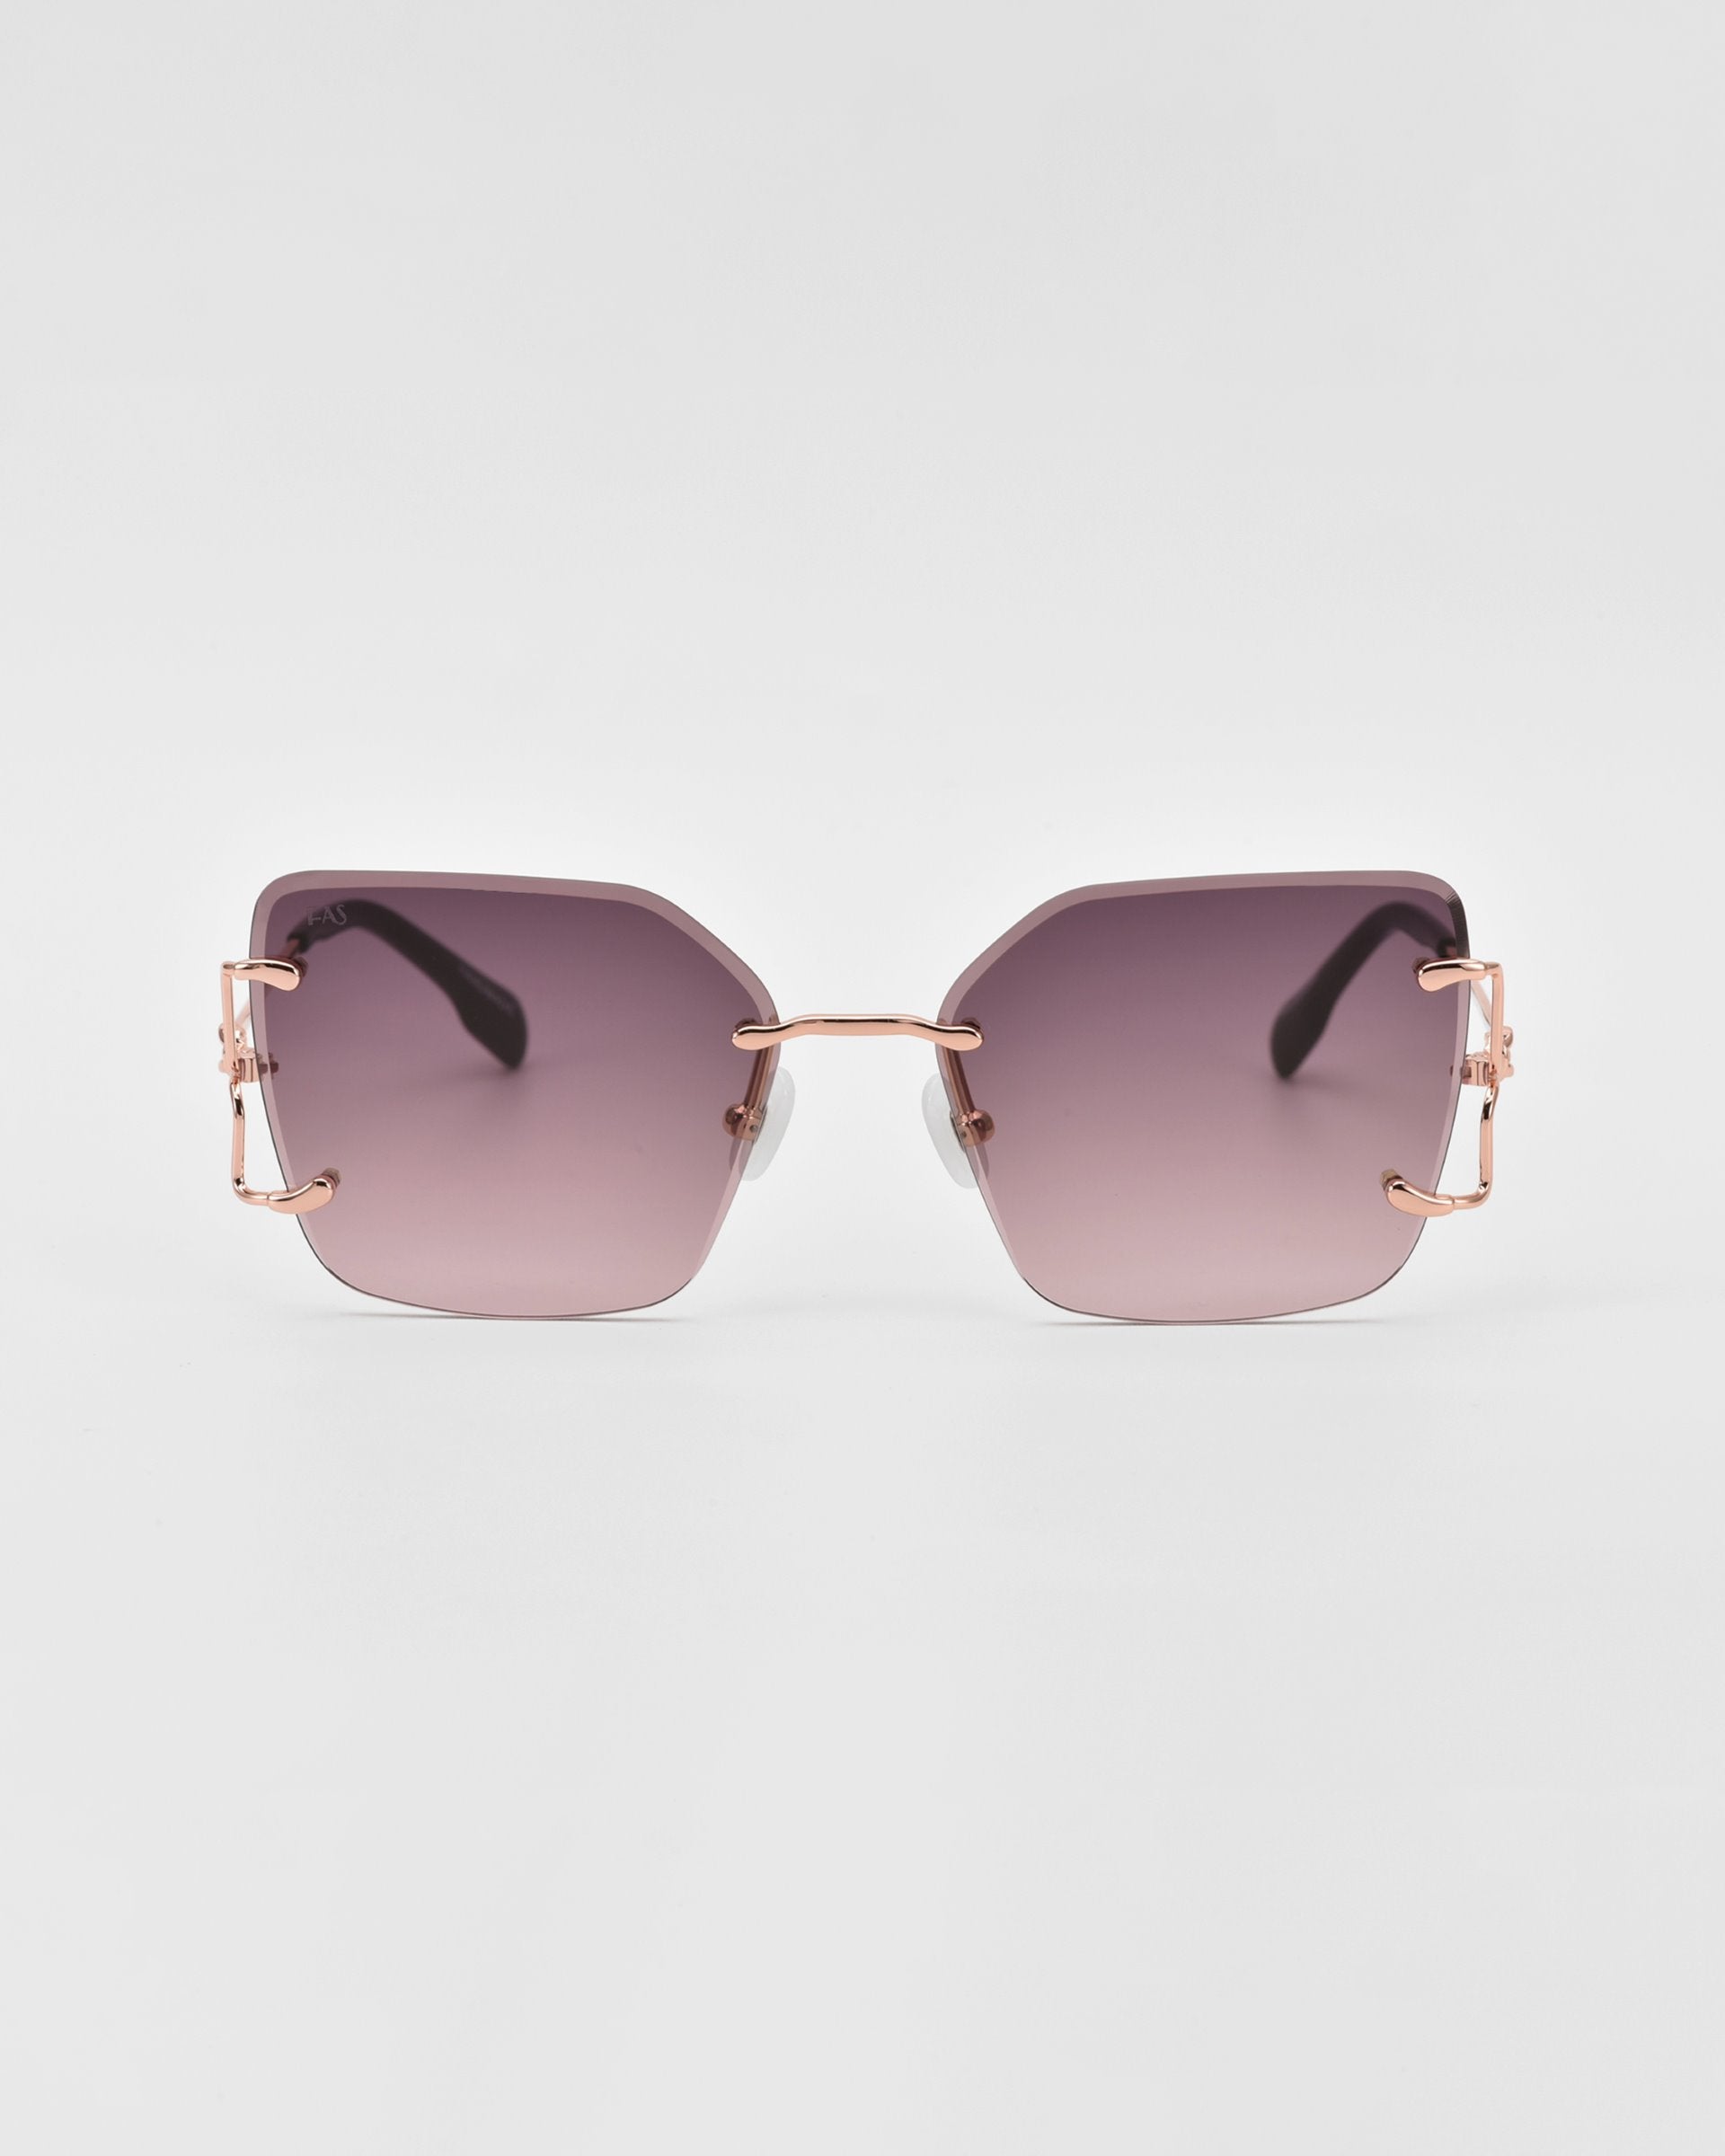 A pair of stylish For Art&#39;s Sake® sunglasses featuring rectangular purple-tinted lenses and rose gold frames. The design is sleek and modern with thin metal temples, adding a fashionable touch to the overall look. Enhanced with jade-stone nosepads for extra comfort, all set against a plain white background.